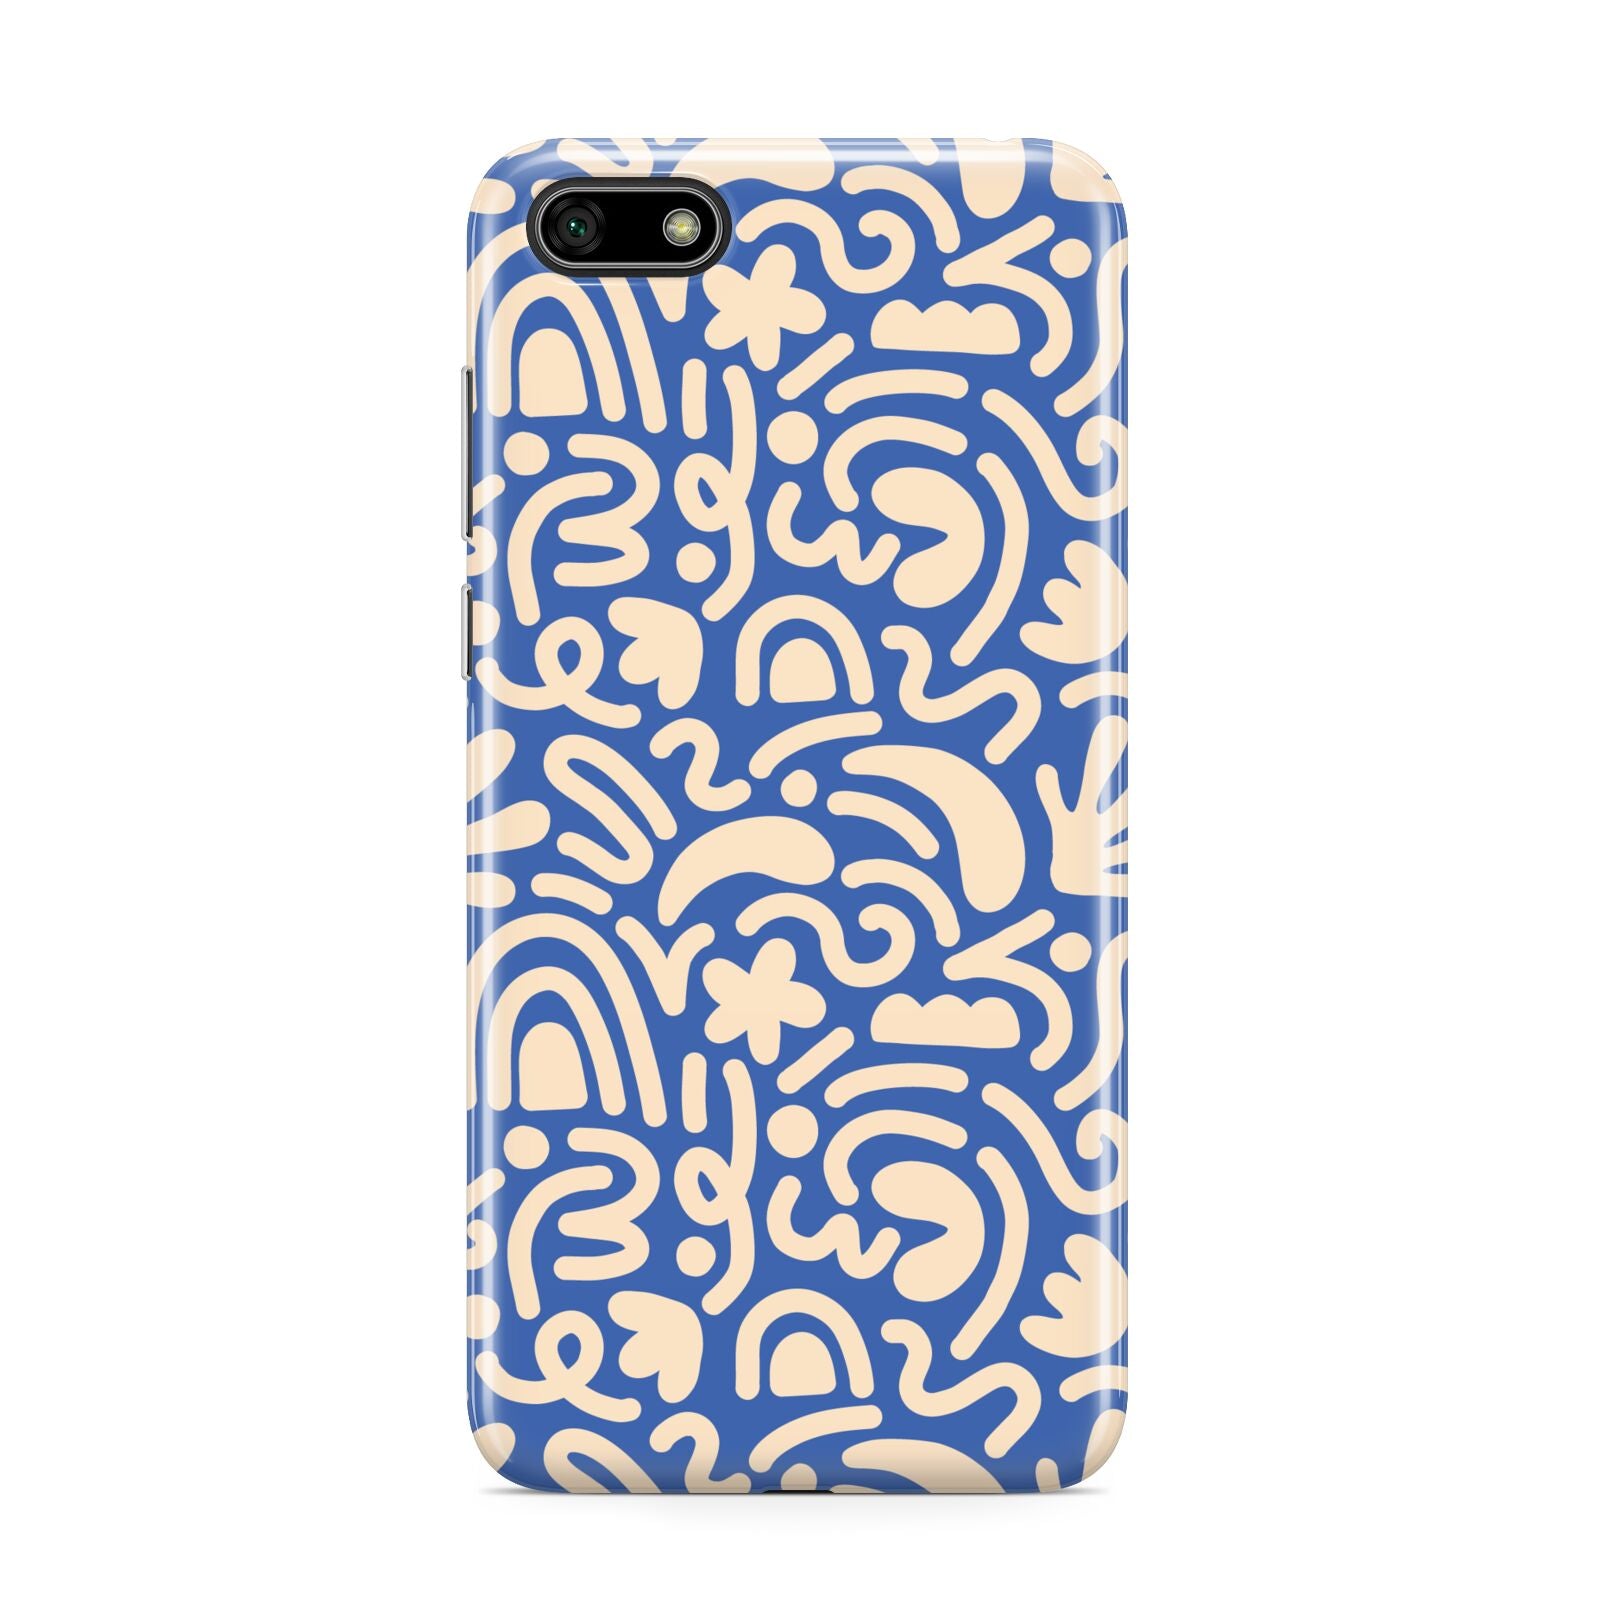 Abstract Huawei Y5 Prime 2018 Phone Case